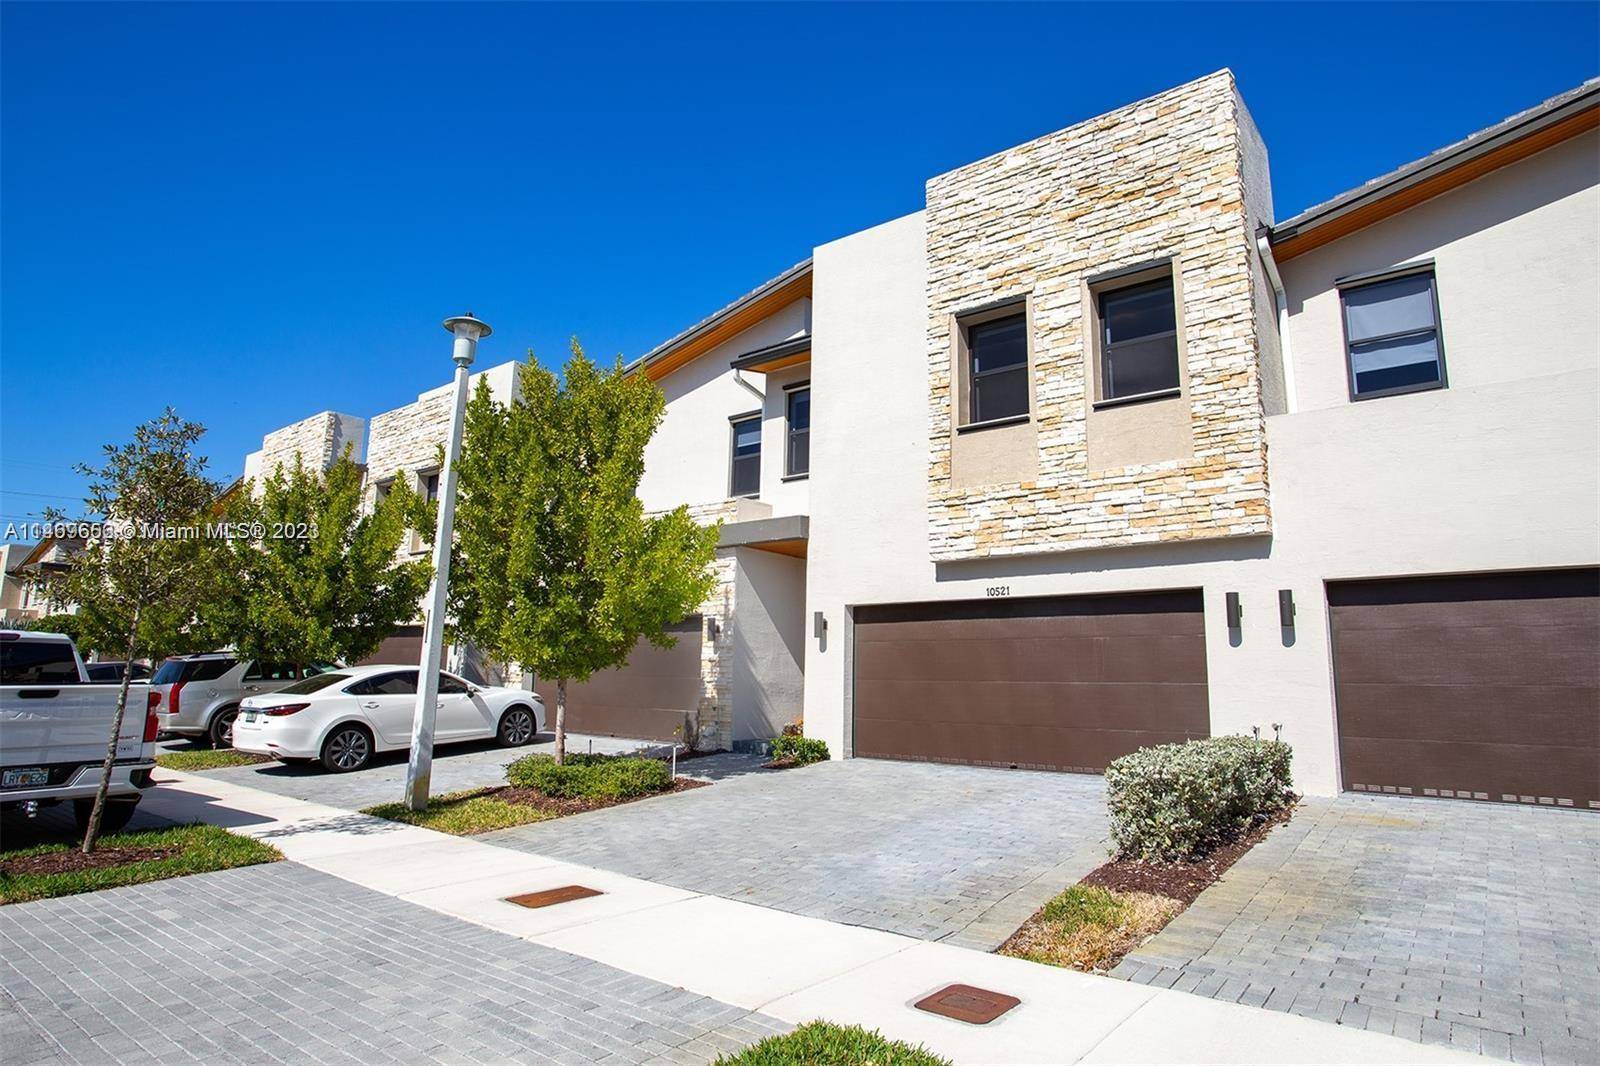 LUXURY LIFESTYLE TOWNHOME 4 BEDROOMS, 3.